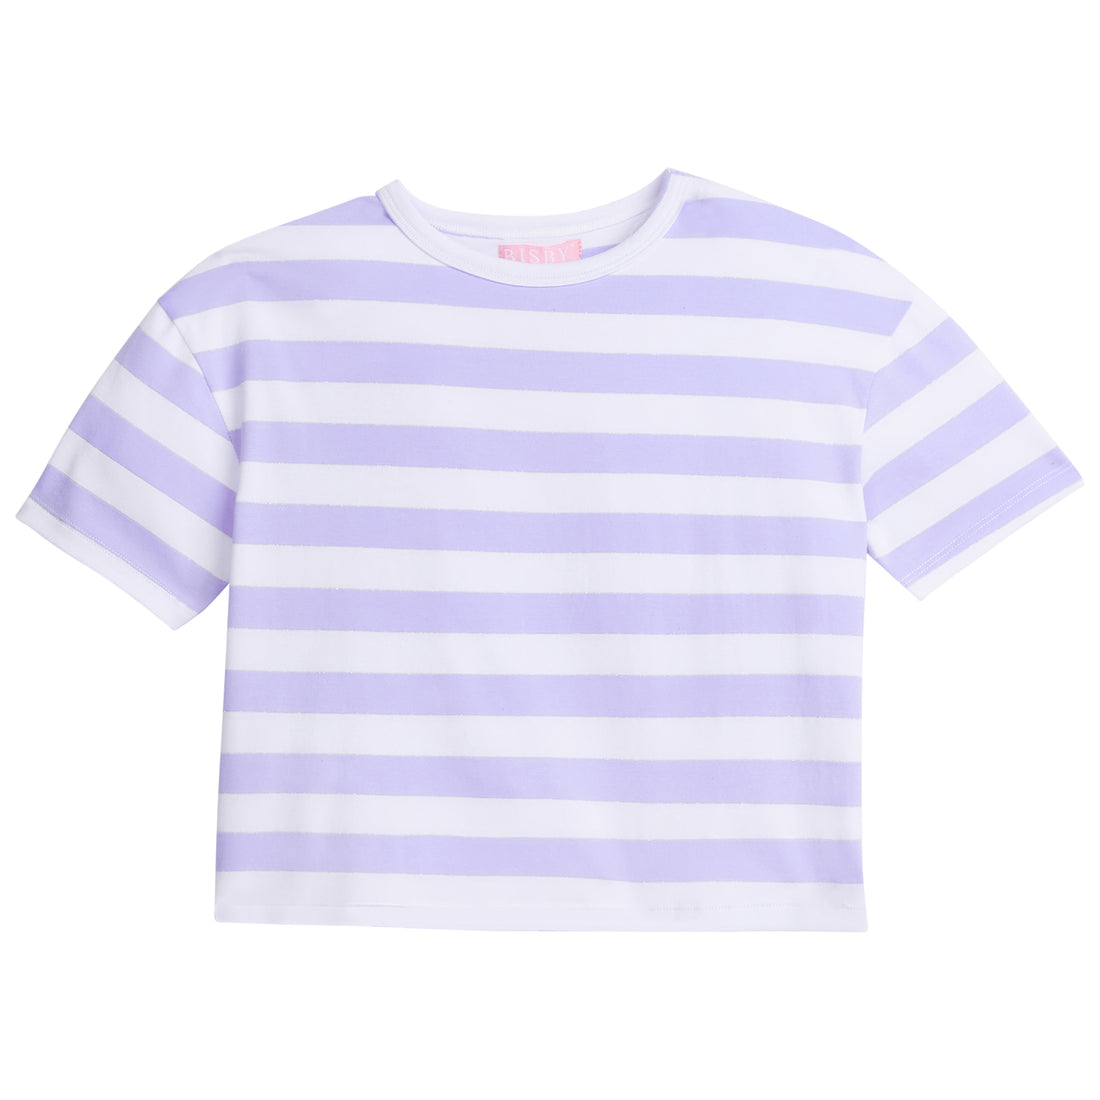 Girl basic tee, slightly cropped, with thick lilac and white stripes, separated by thin silver metallic stripes for an extra pop